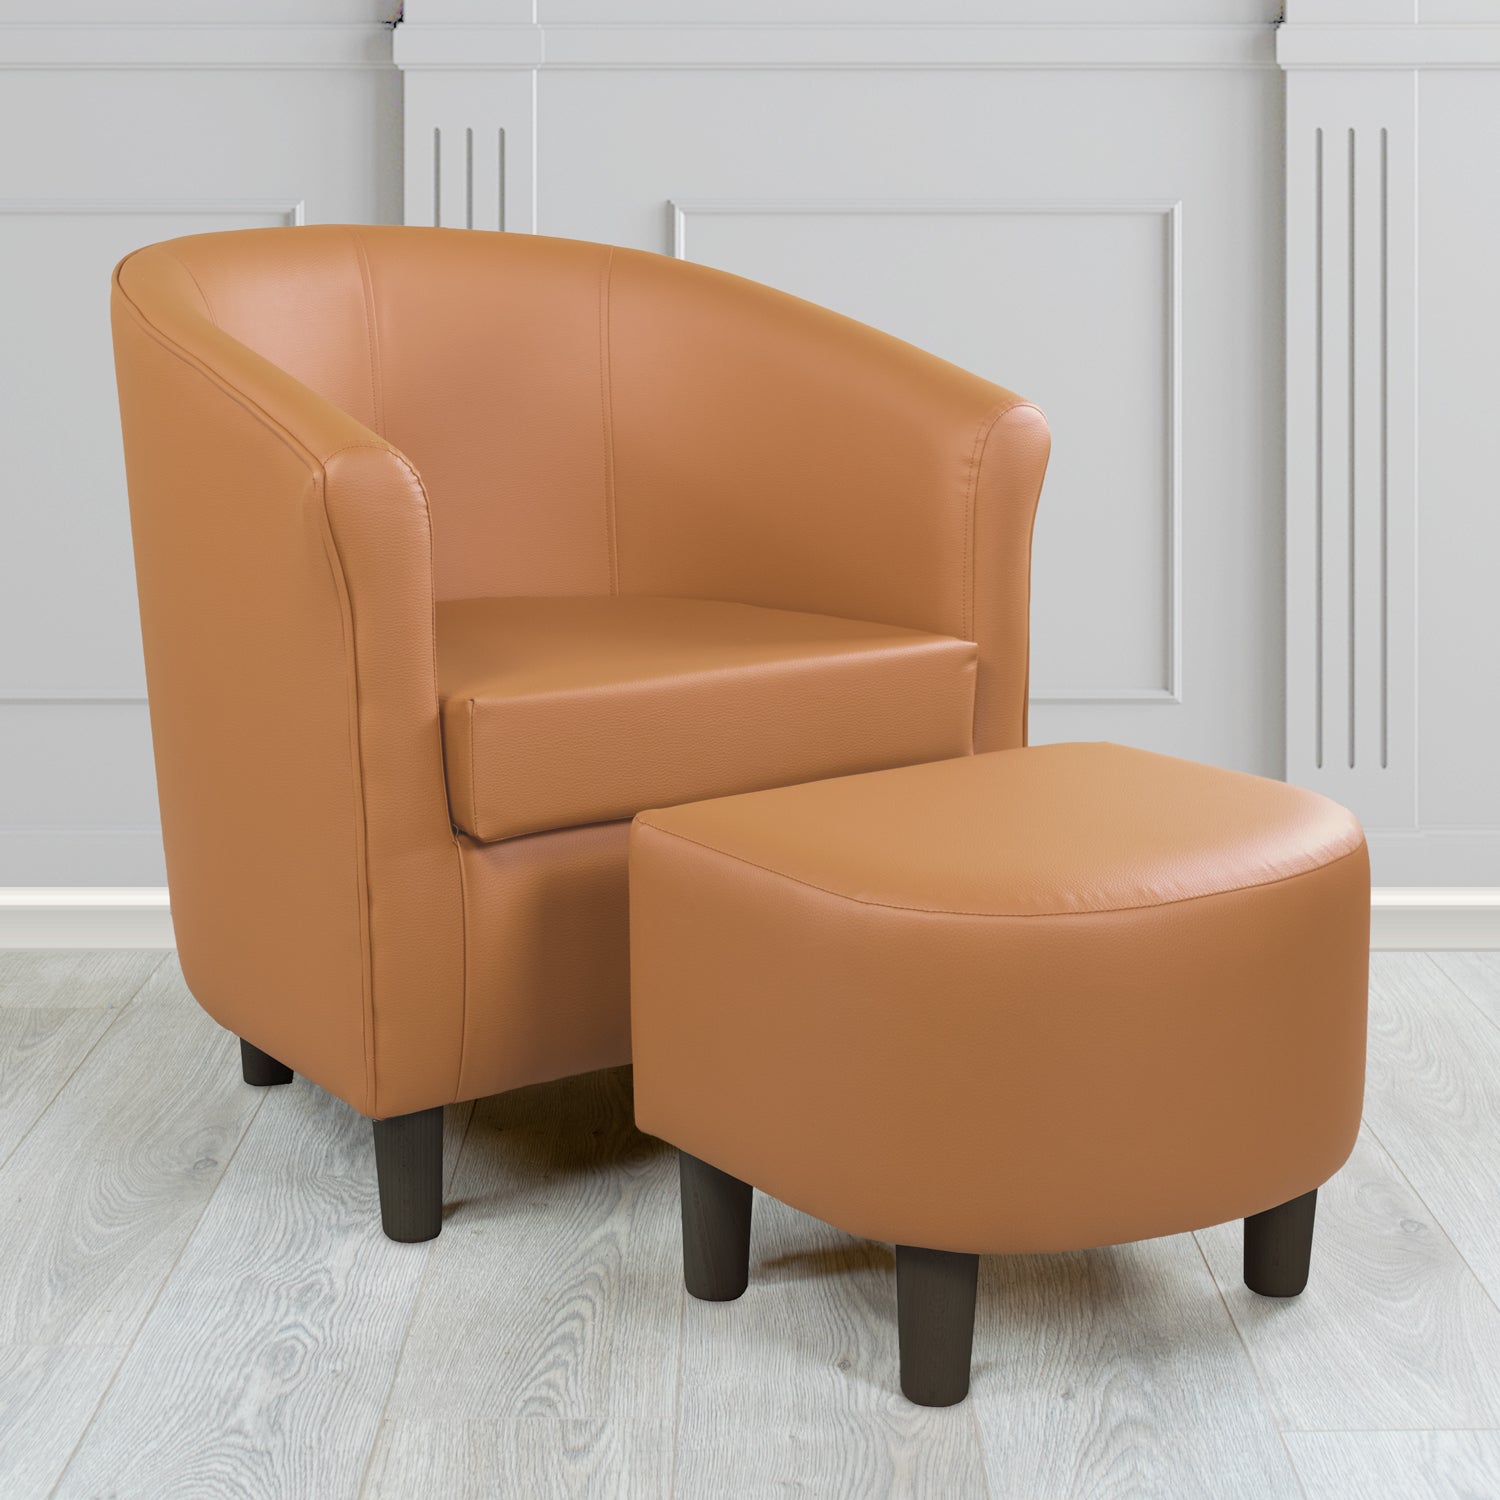 Tuscany Just Colour Fudge Faux Leather Tub Chair with Dee Footstool Set - The Tub Chair Shop